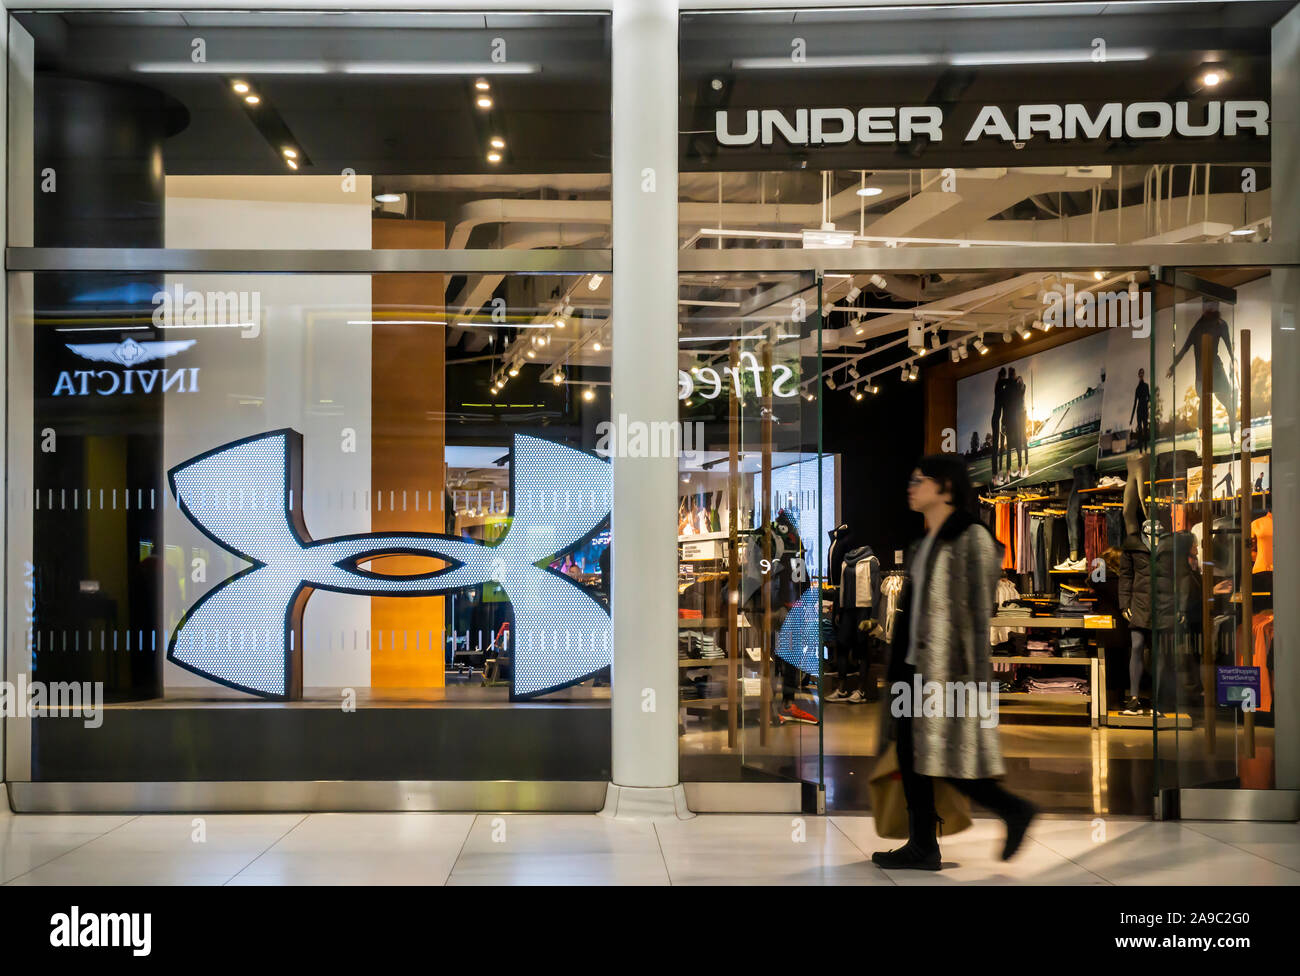 The Under Armour store in the Westfield World Trade Center Oculus mall in New  York on Tuesday, November 12, 2019. The SEC is reported to be investigating  whether Under Armour shifted sales